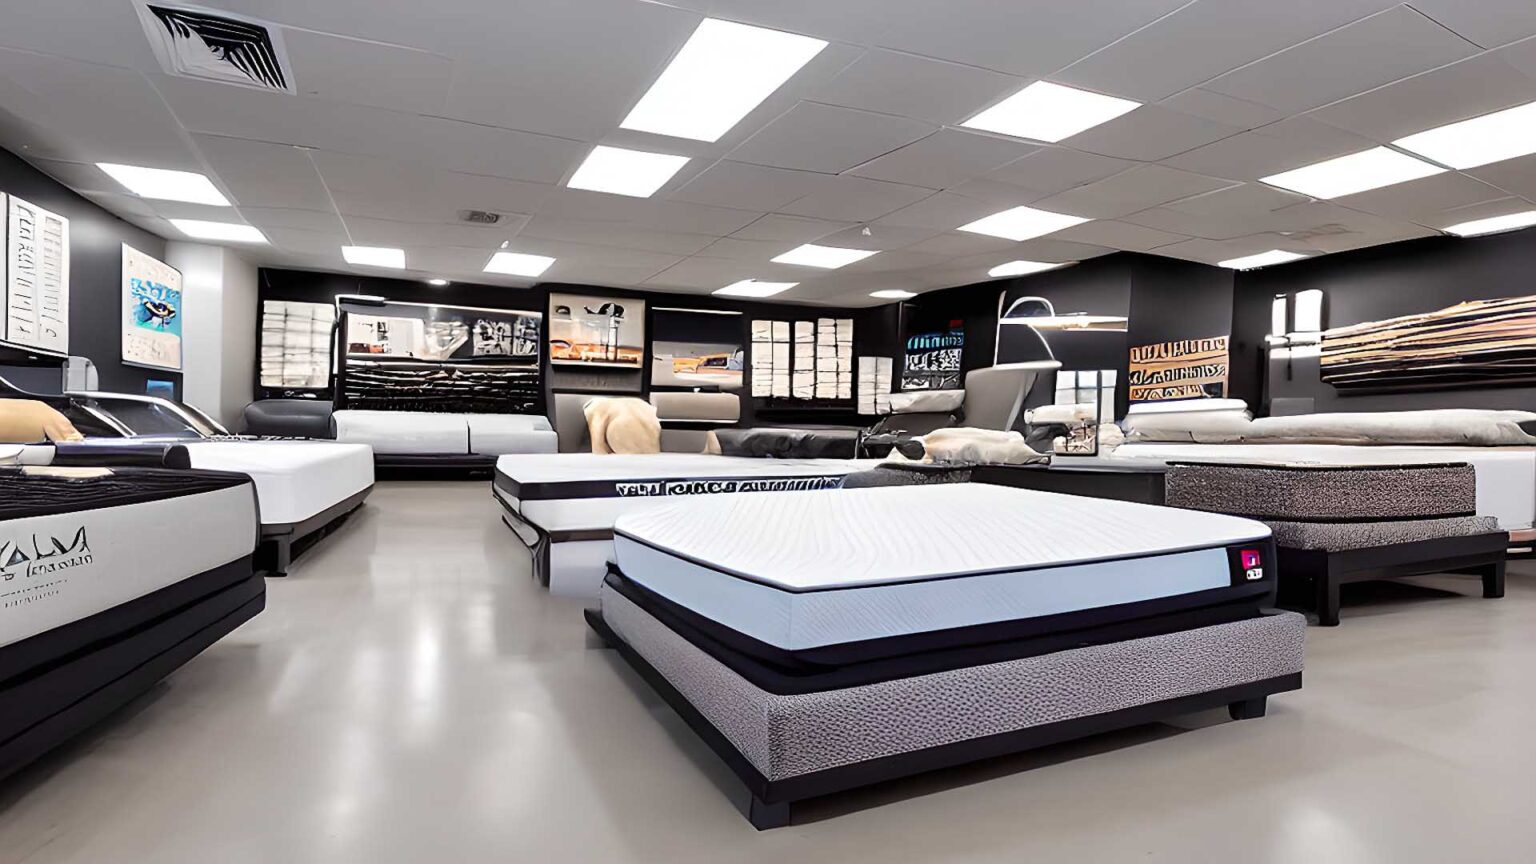 Mattress Stores, mattress dealers, and mattress retailers near me in West Covina, CA